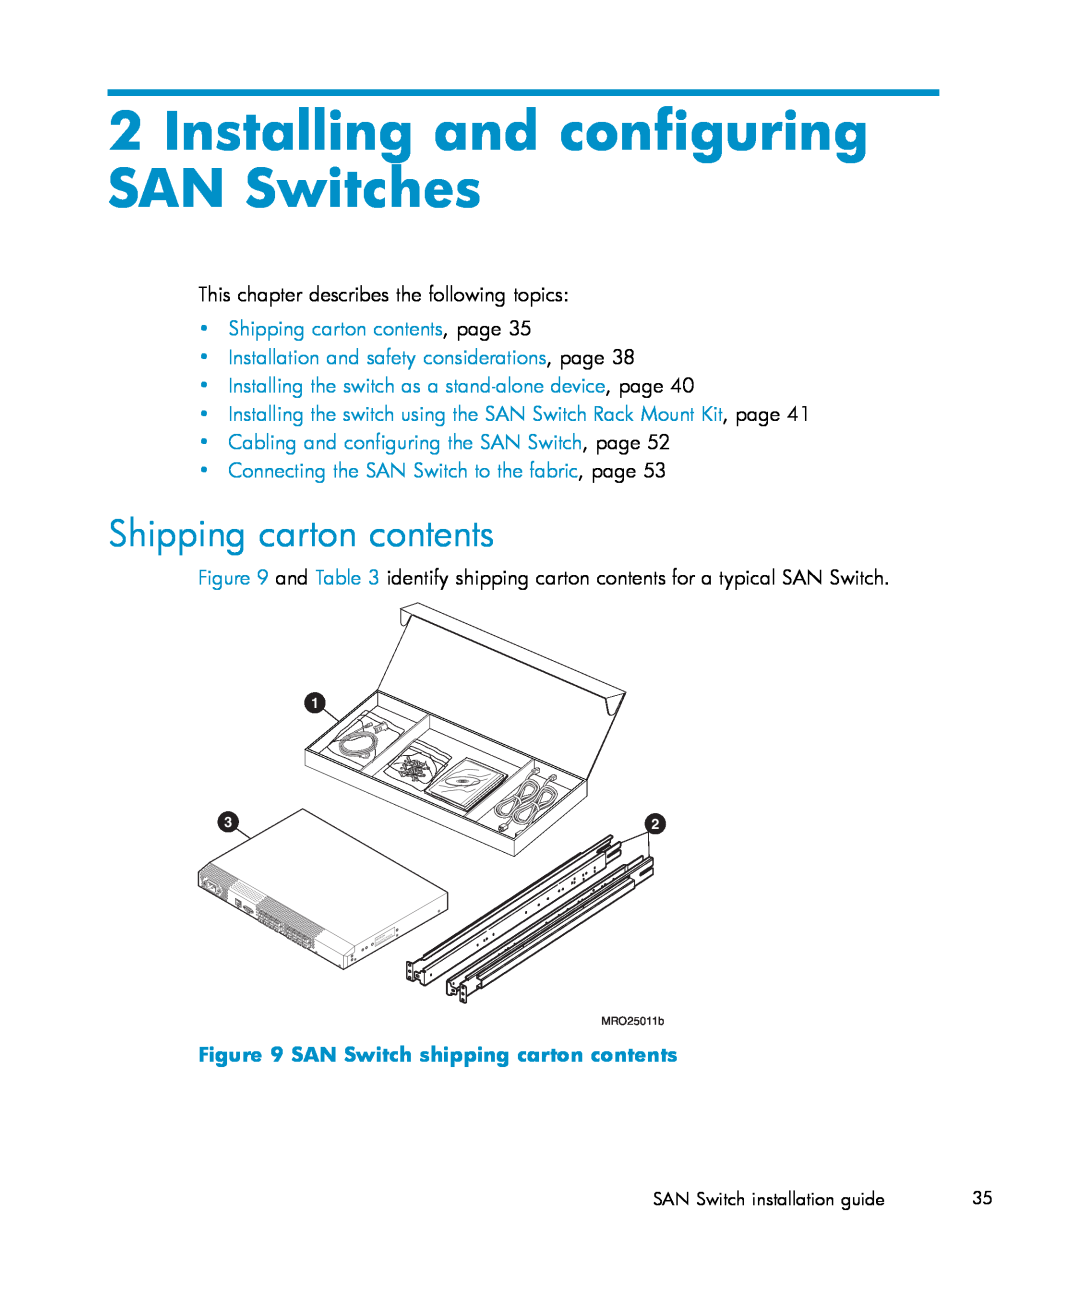 IBM AA-RWF3A-TE manual Installing and configuring SAN Switches, Shipping carton contents, page 